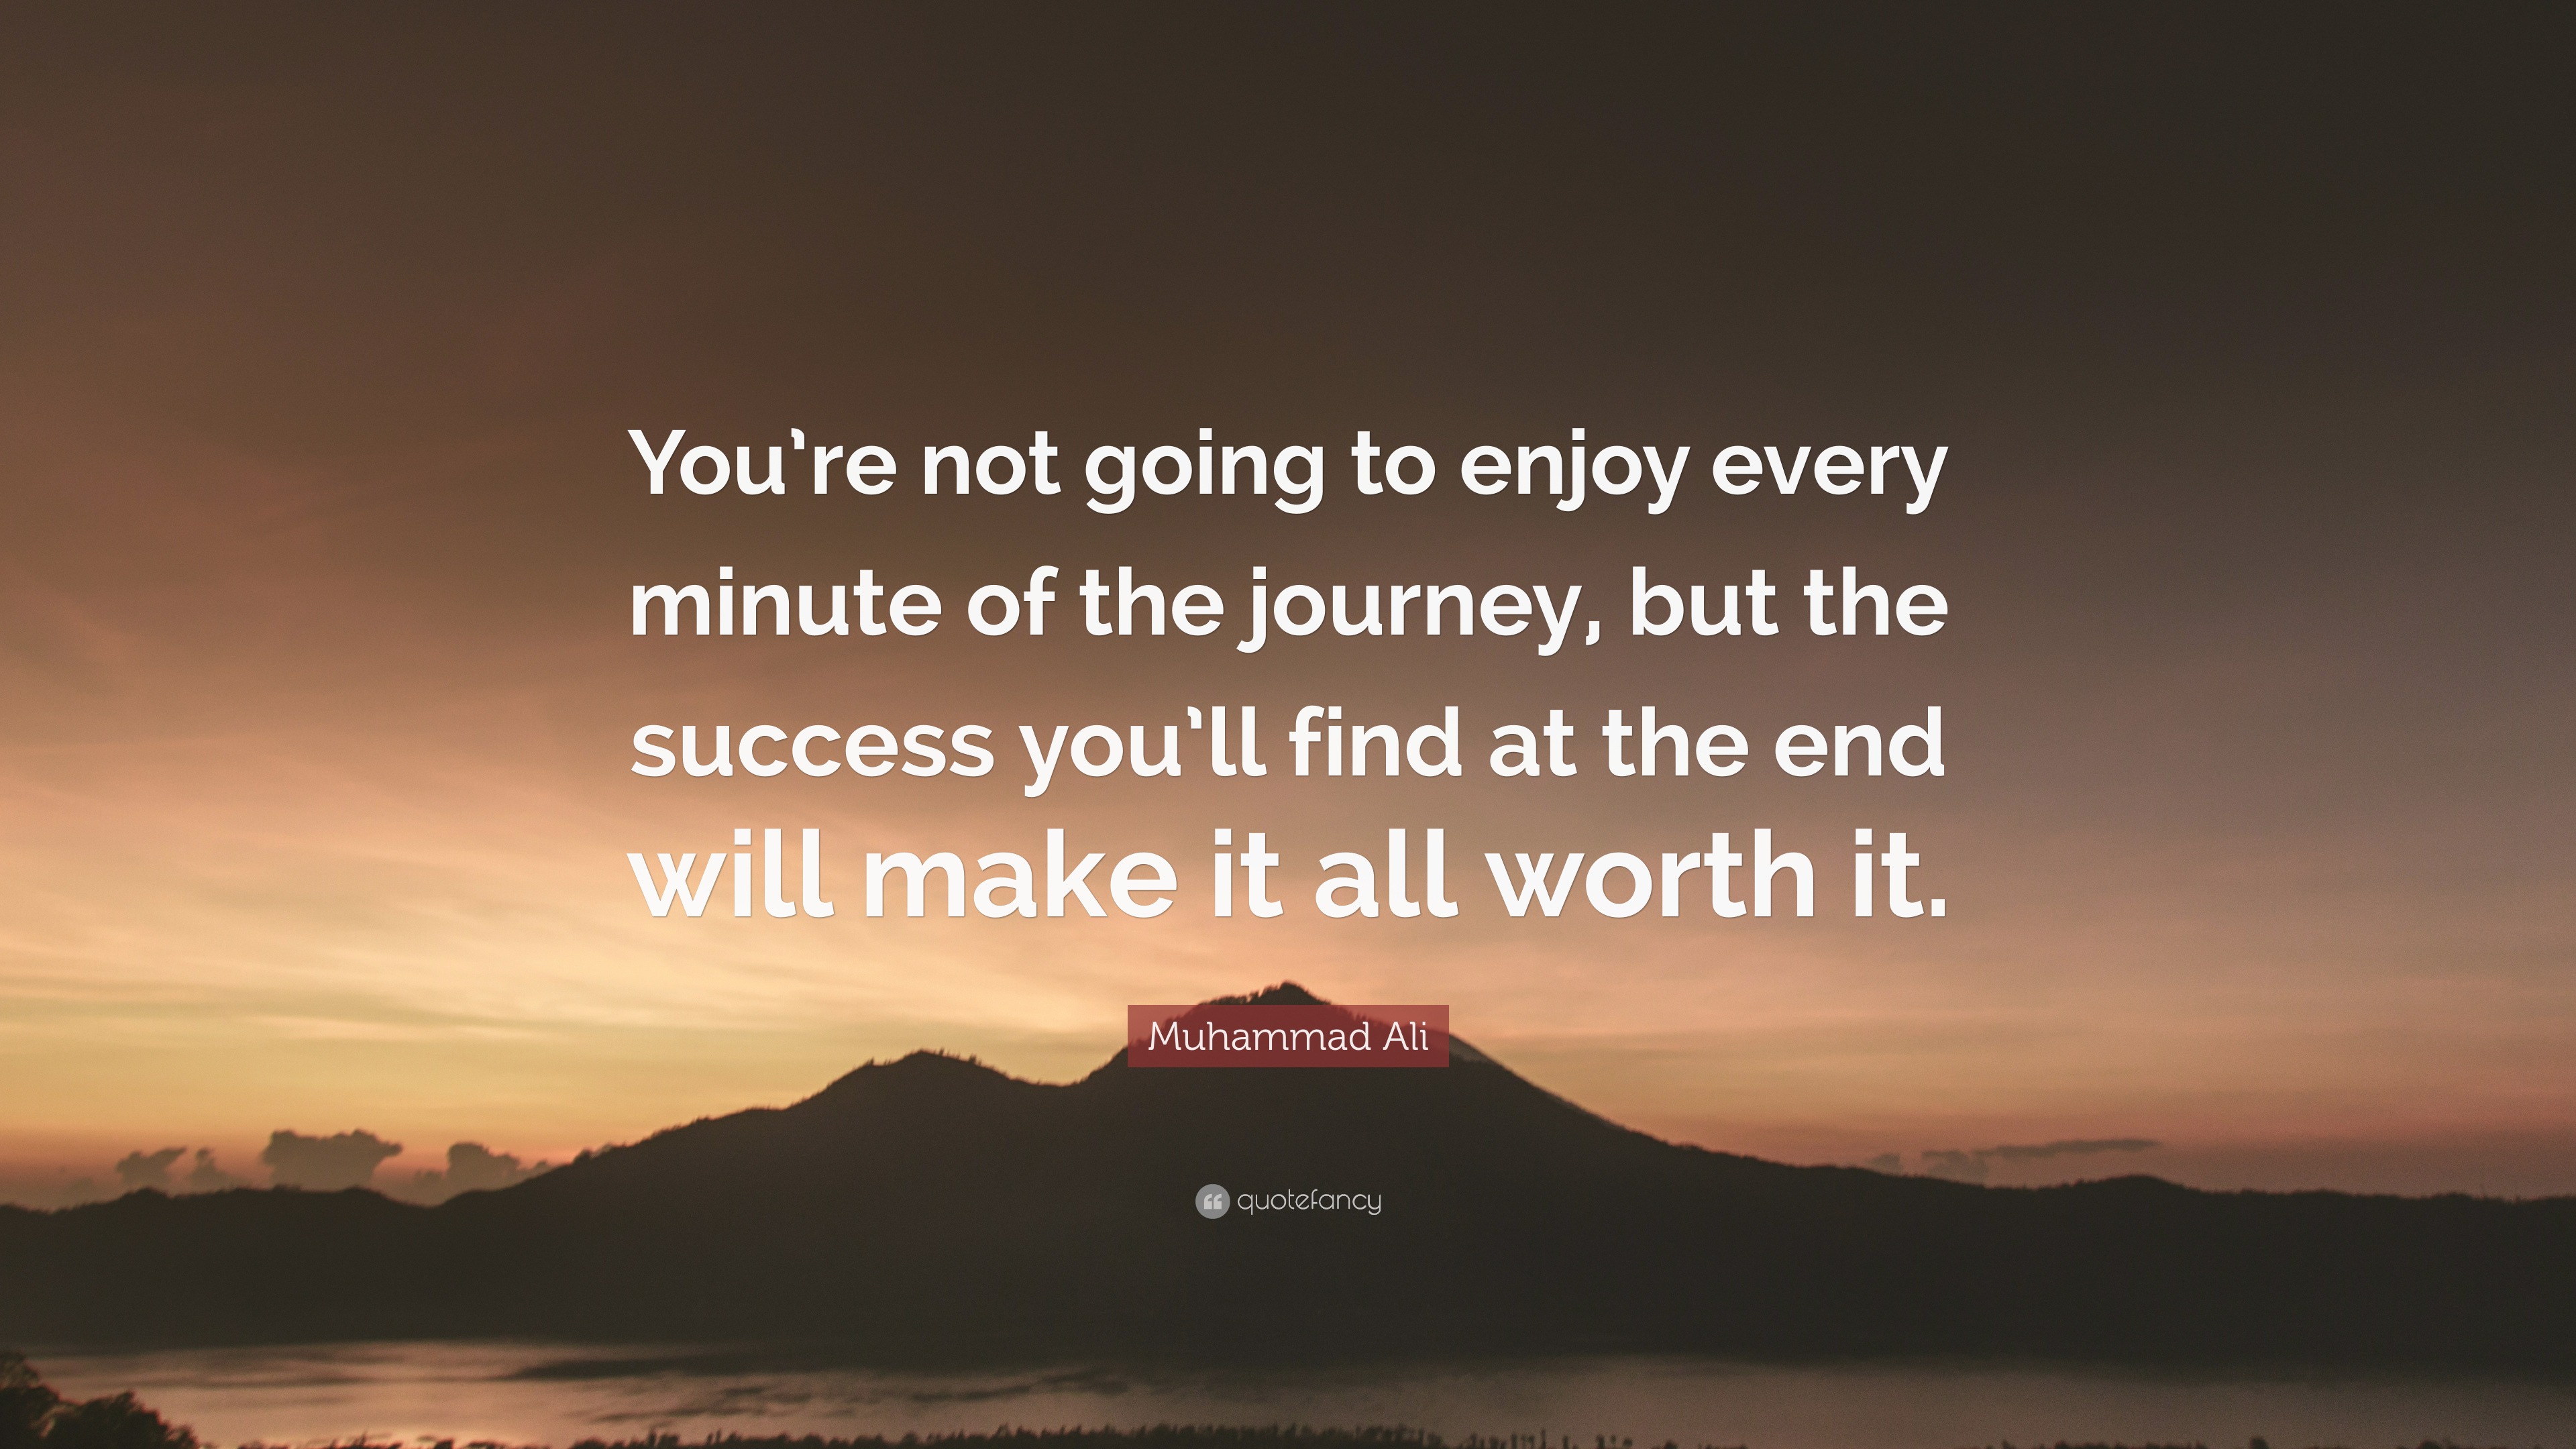 Muhammad Ali Quote: “You’re not going to enjoy every minute of the ...